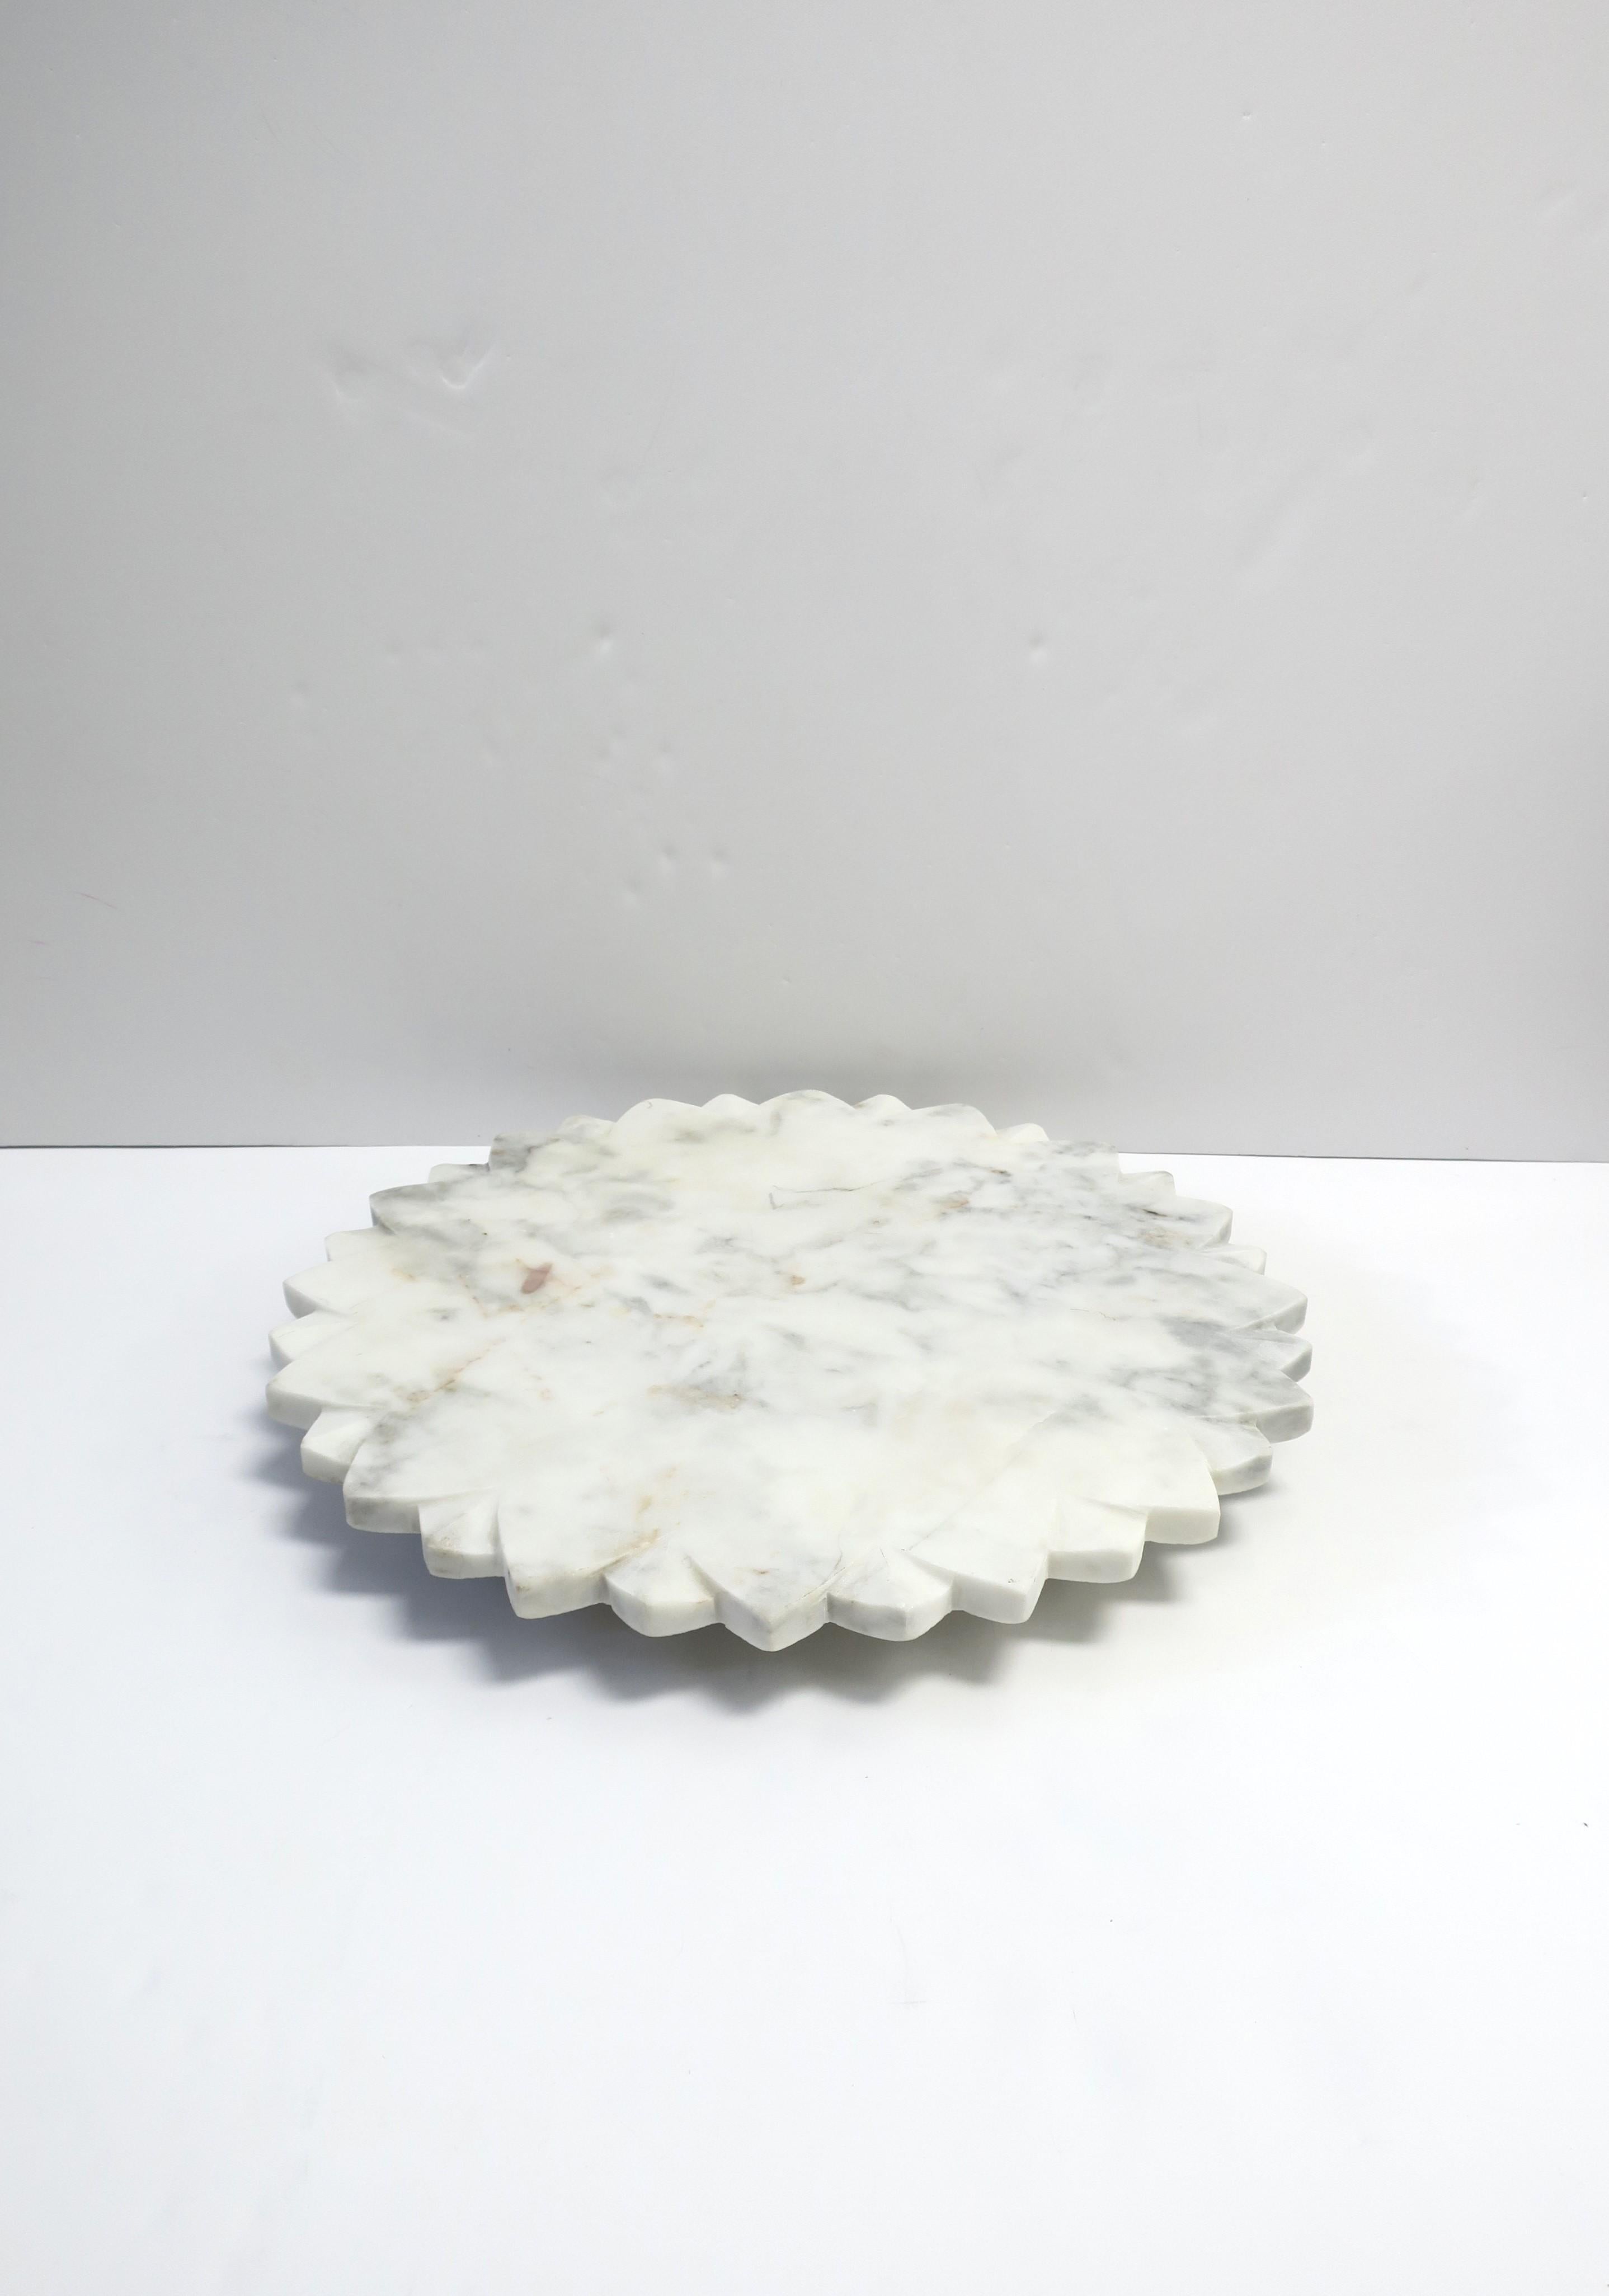 A substantial, predominantly white, marble Lazy-Susan with star-like design, circa 21st century. Marble is white with grey and light-burgundy red veining/hues. A great piece for a kitchen, bar, entertaining area, etc. Use it to hold salt/pepper,